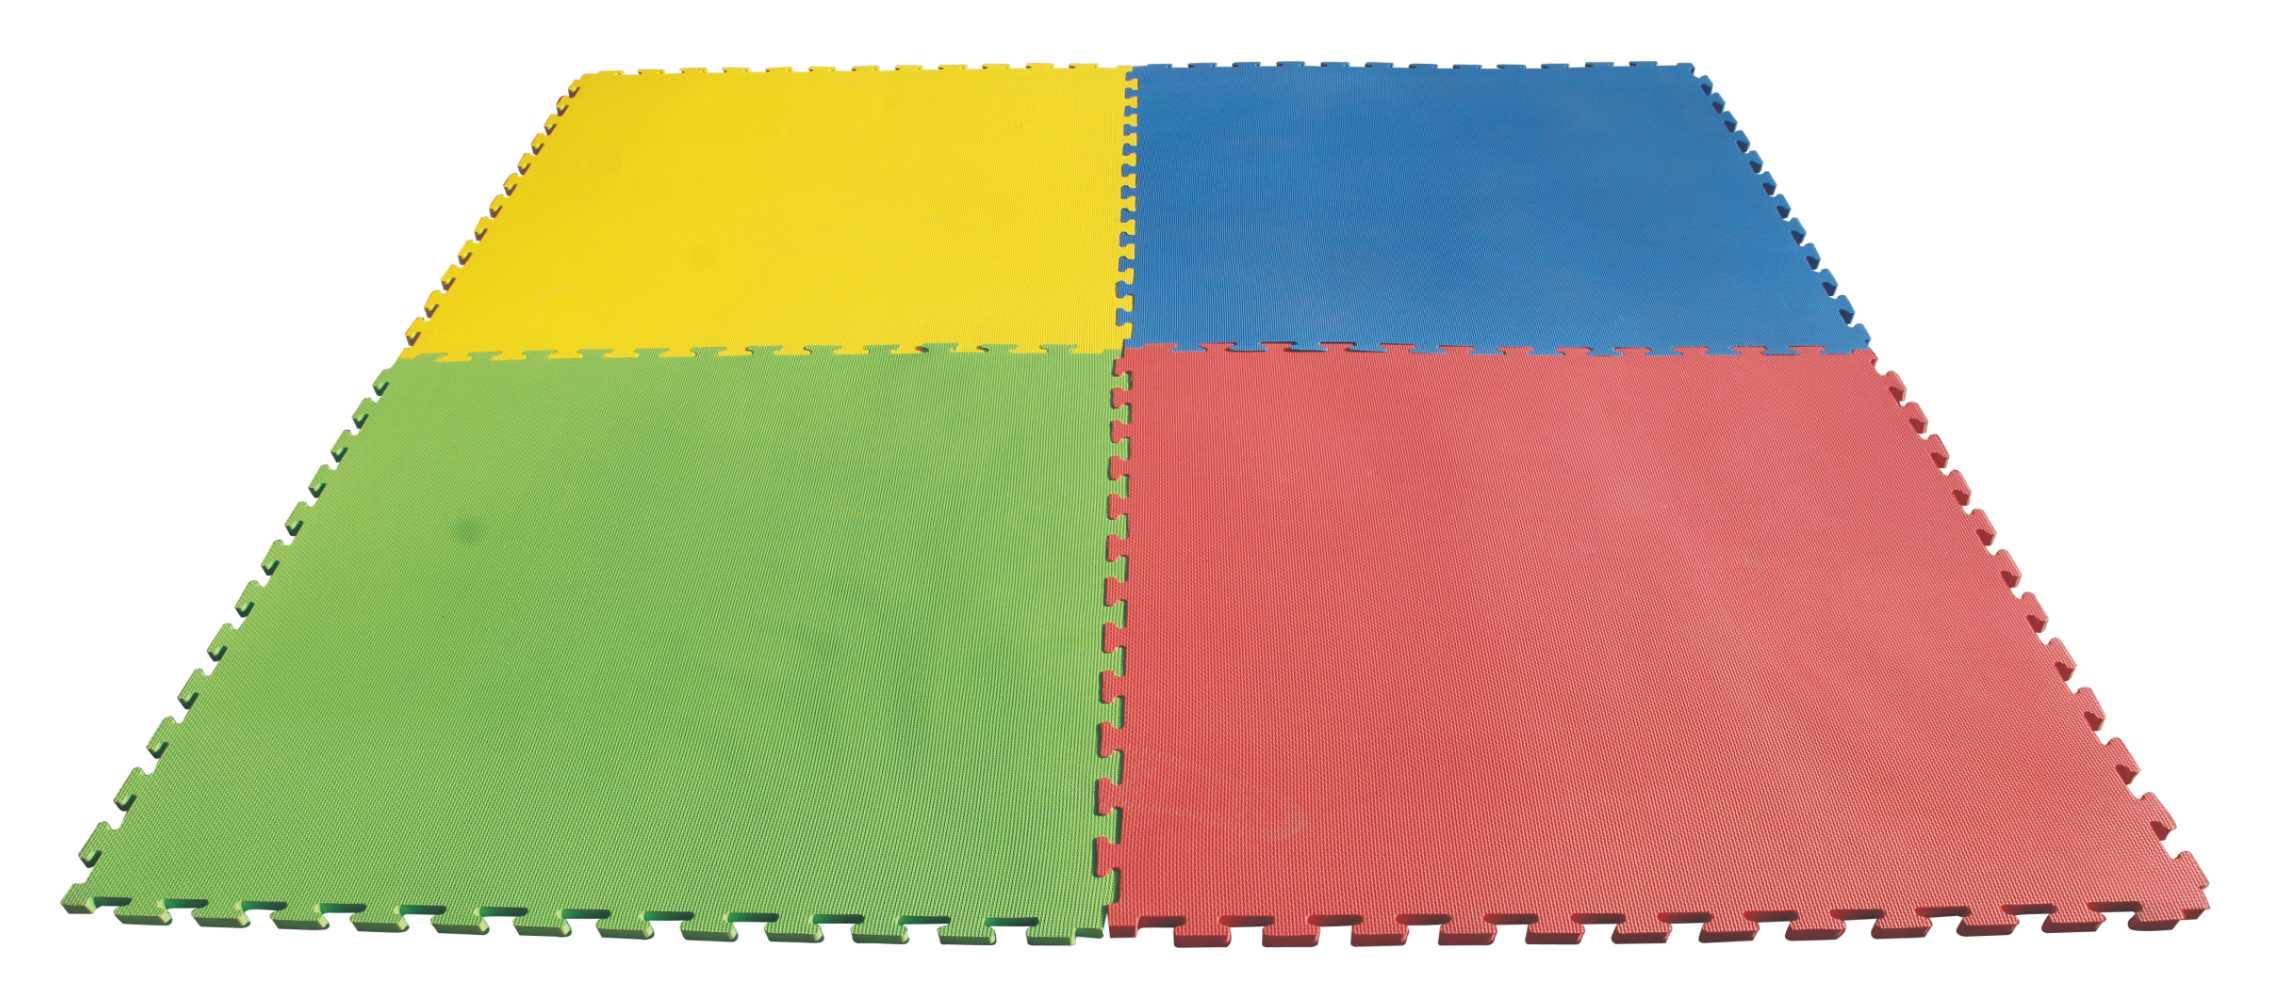 RBWTOYS Solid Color Safe, Strong Floor  Mat For Home, Office etc., Single Peice.  RW-18807  2.0cm blue 